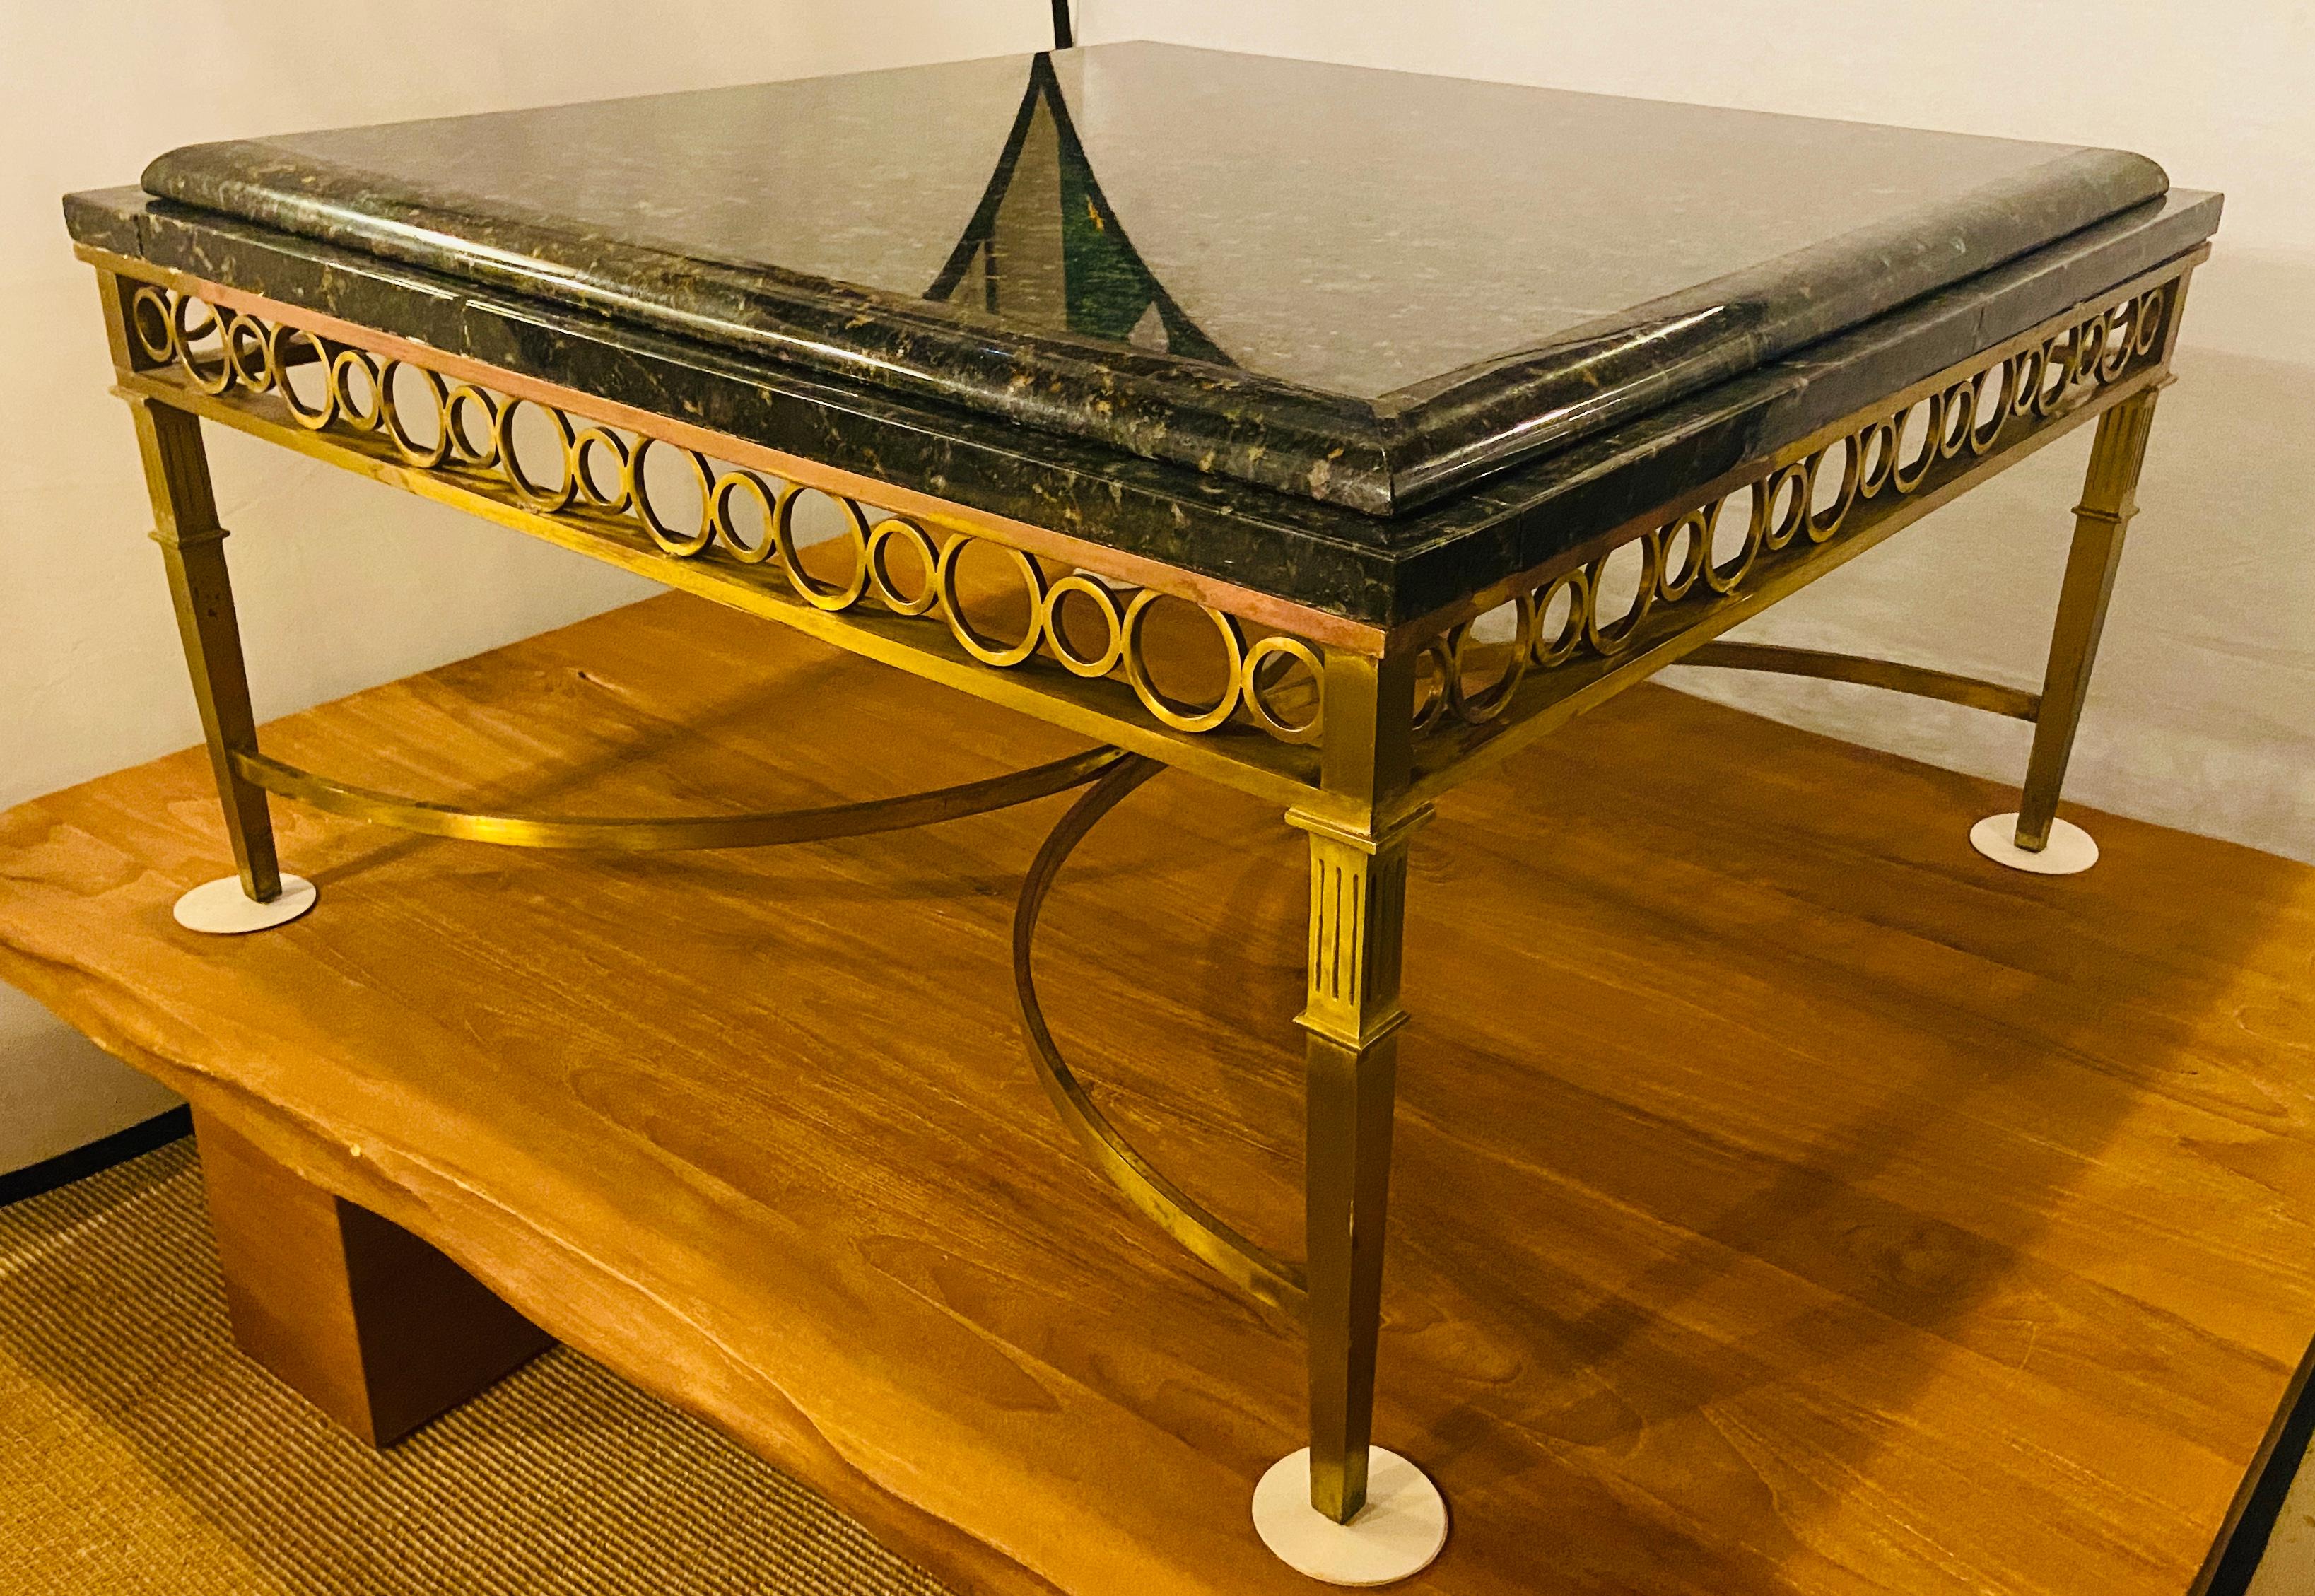 Hollywood Regency granite top on brass base center or cocktail table
This lovely square shaped Hollywood Regency center or cocktail table features a heavy granite top in dark green, yellow and black tones. The brass base is finely hand carved with